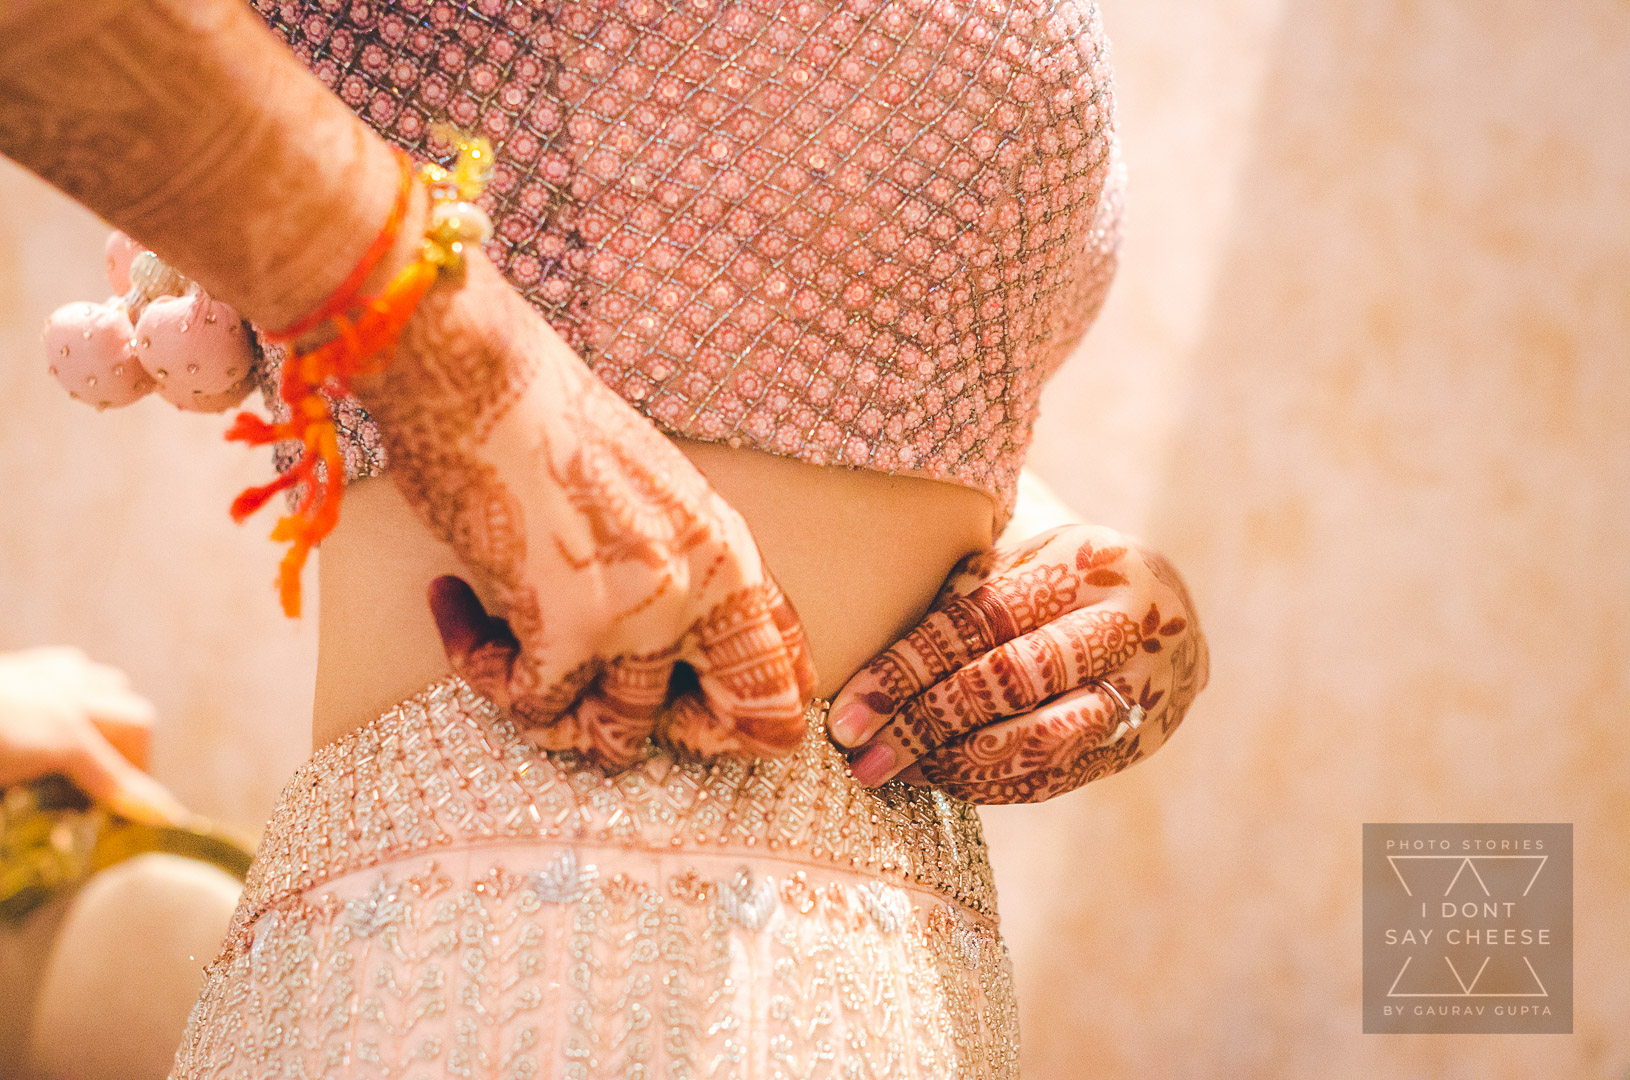 The bride adjusts her lehenga in her getting ready photos